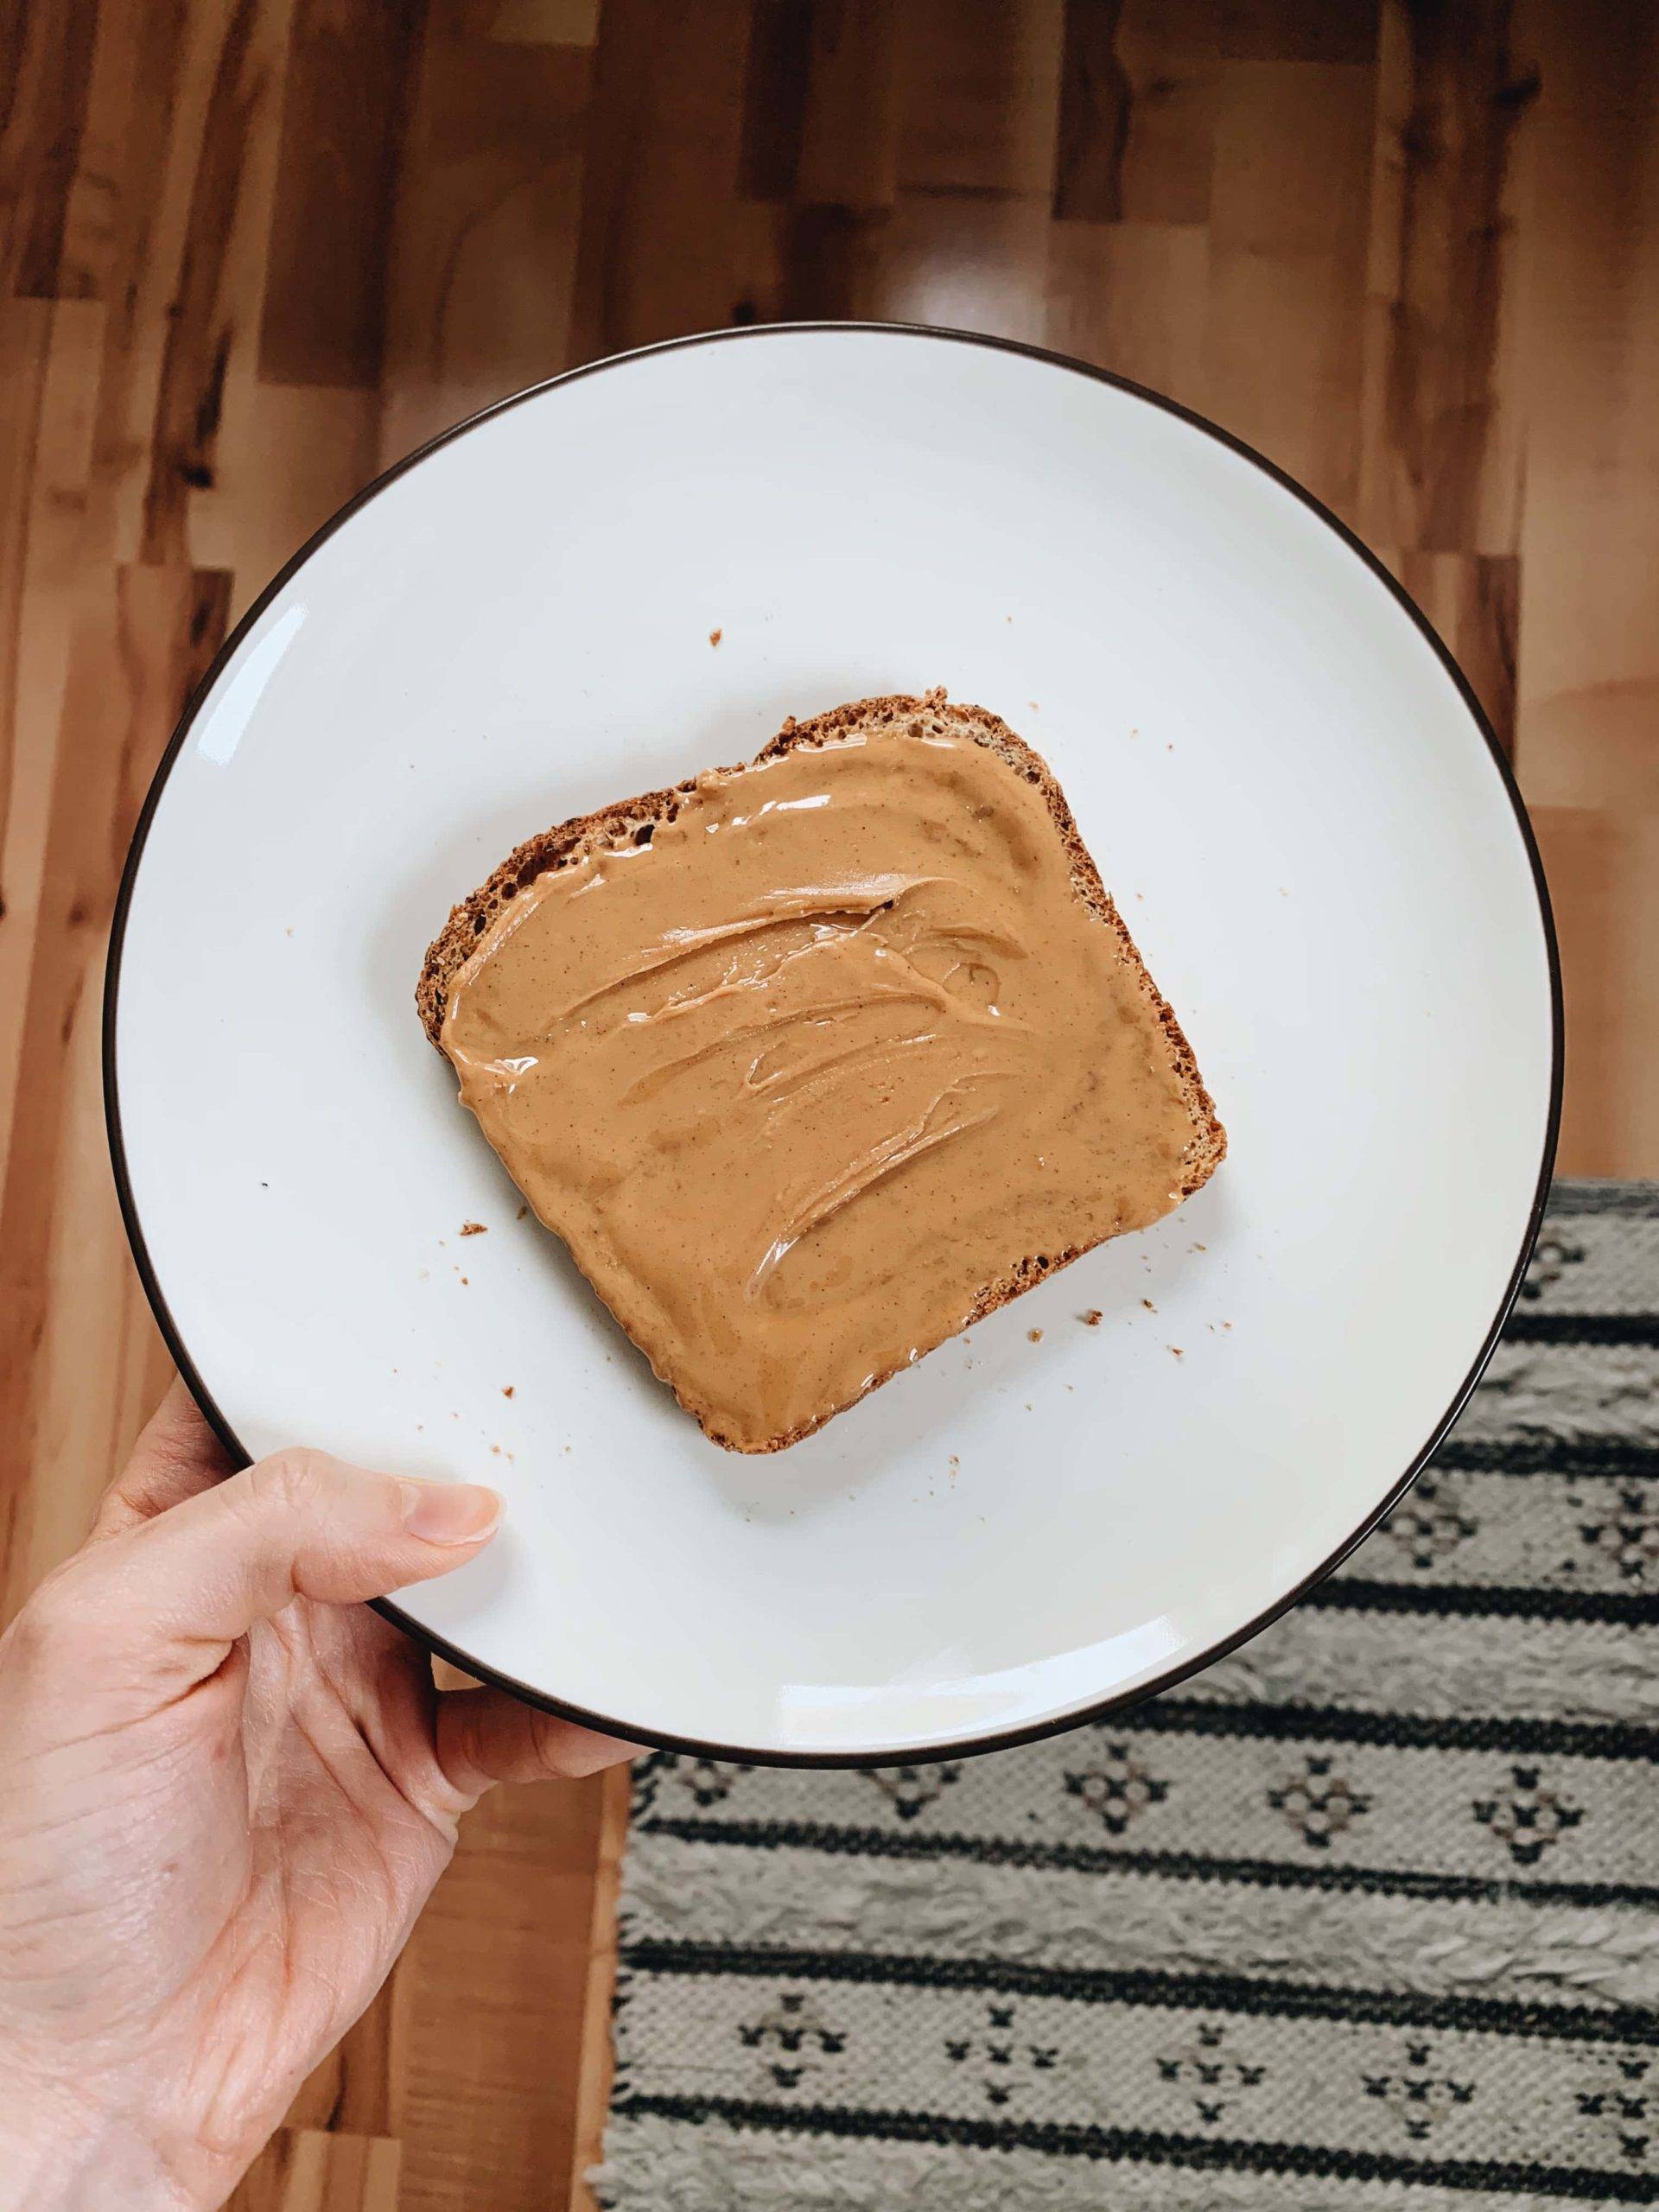 A hand holding a white plate with a piece of bread covered with peanut butter on the plate.